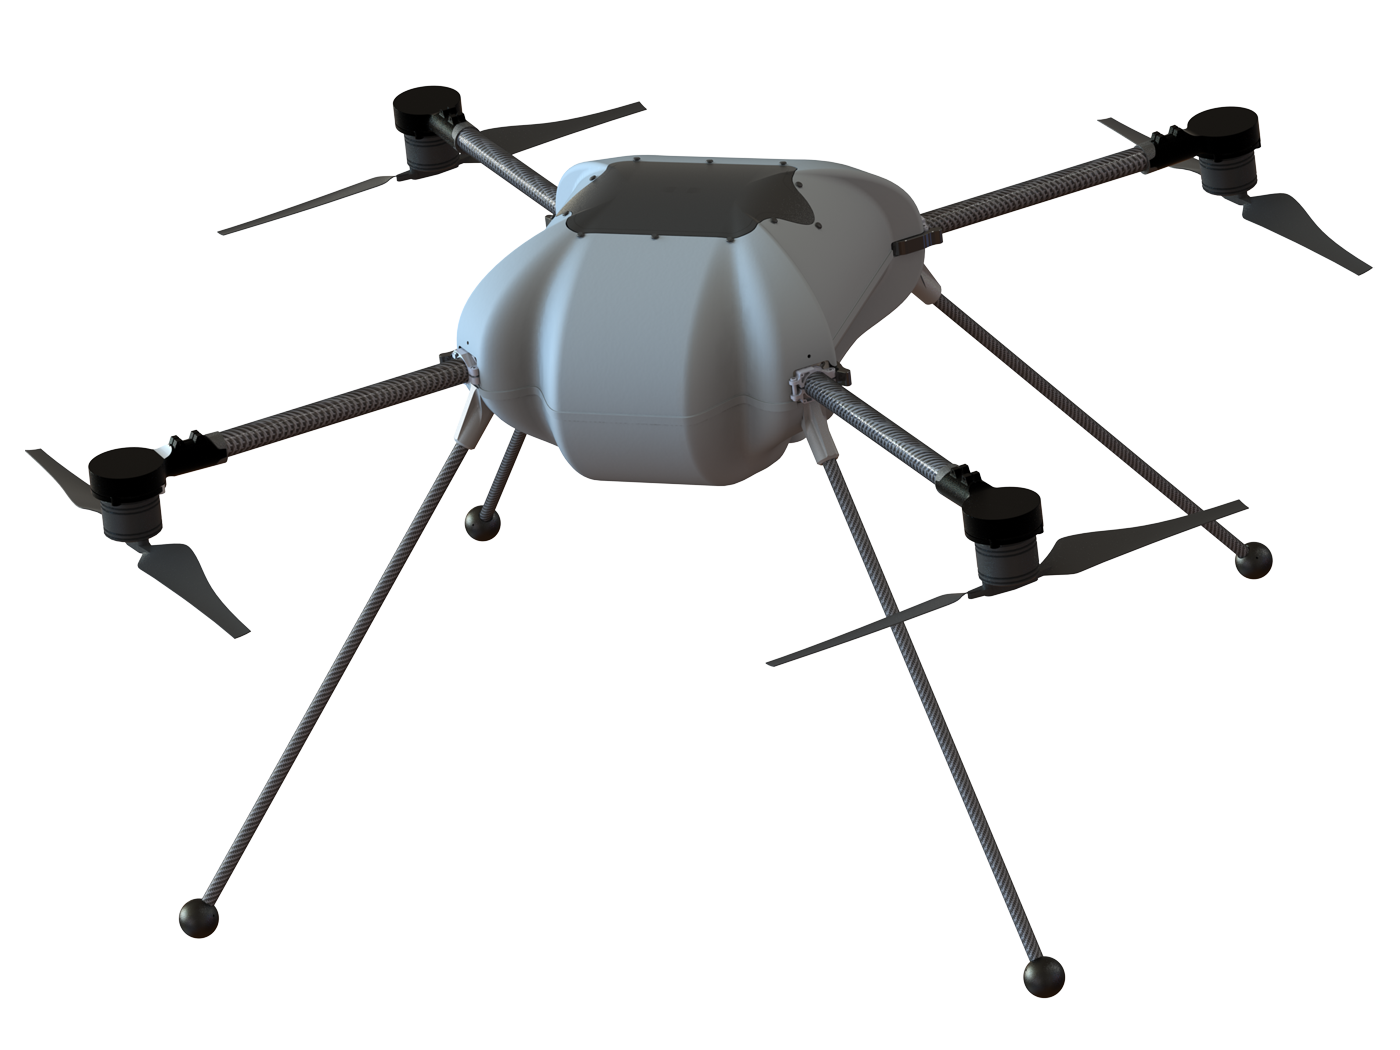 Military Drone PNG Image HD